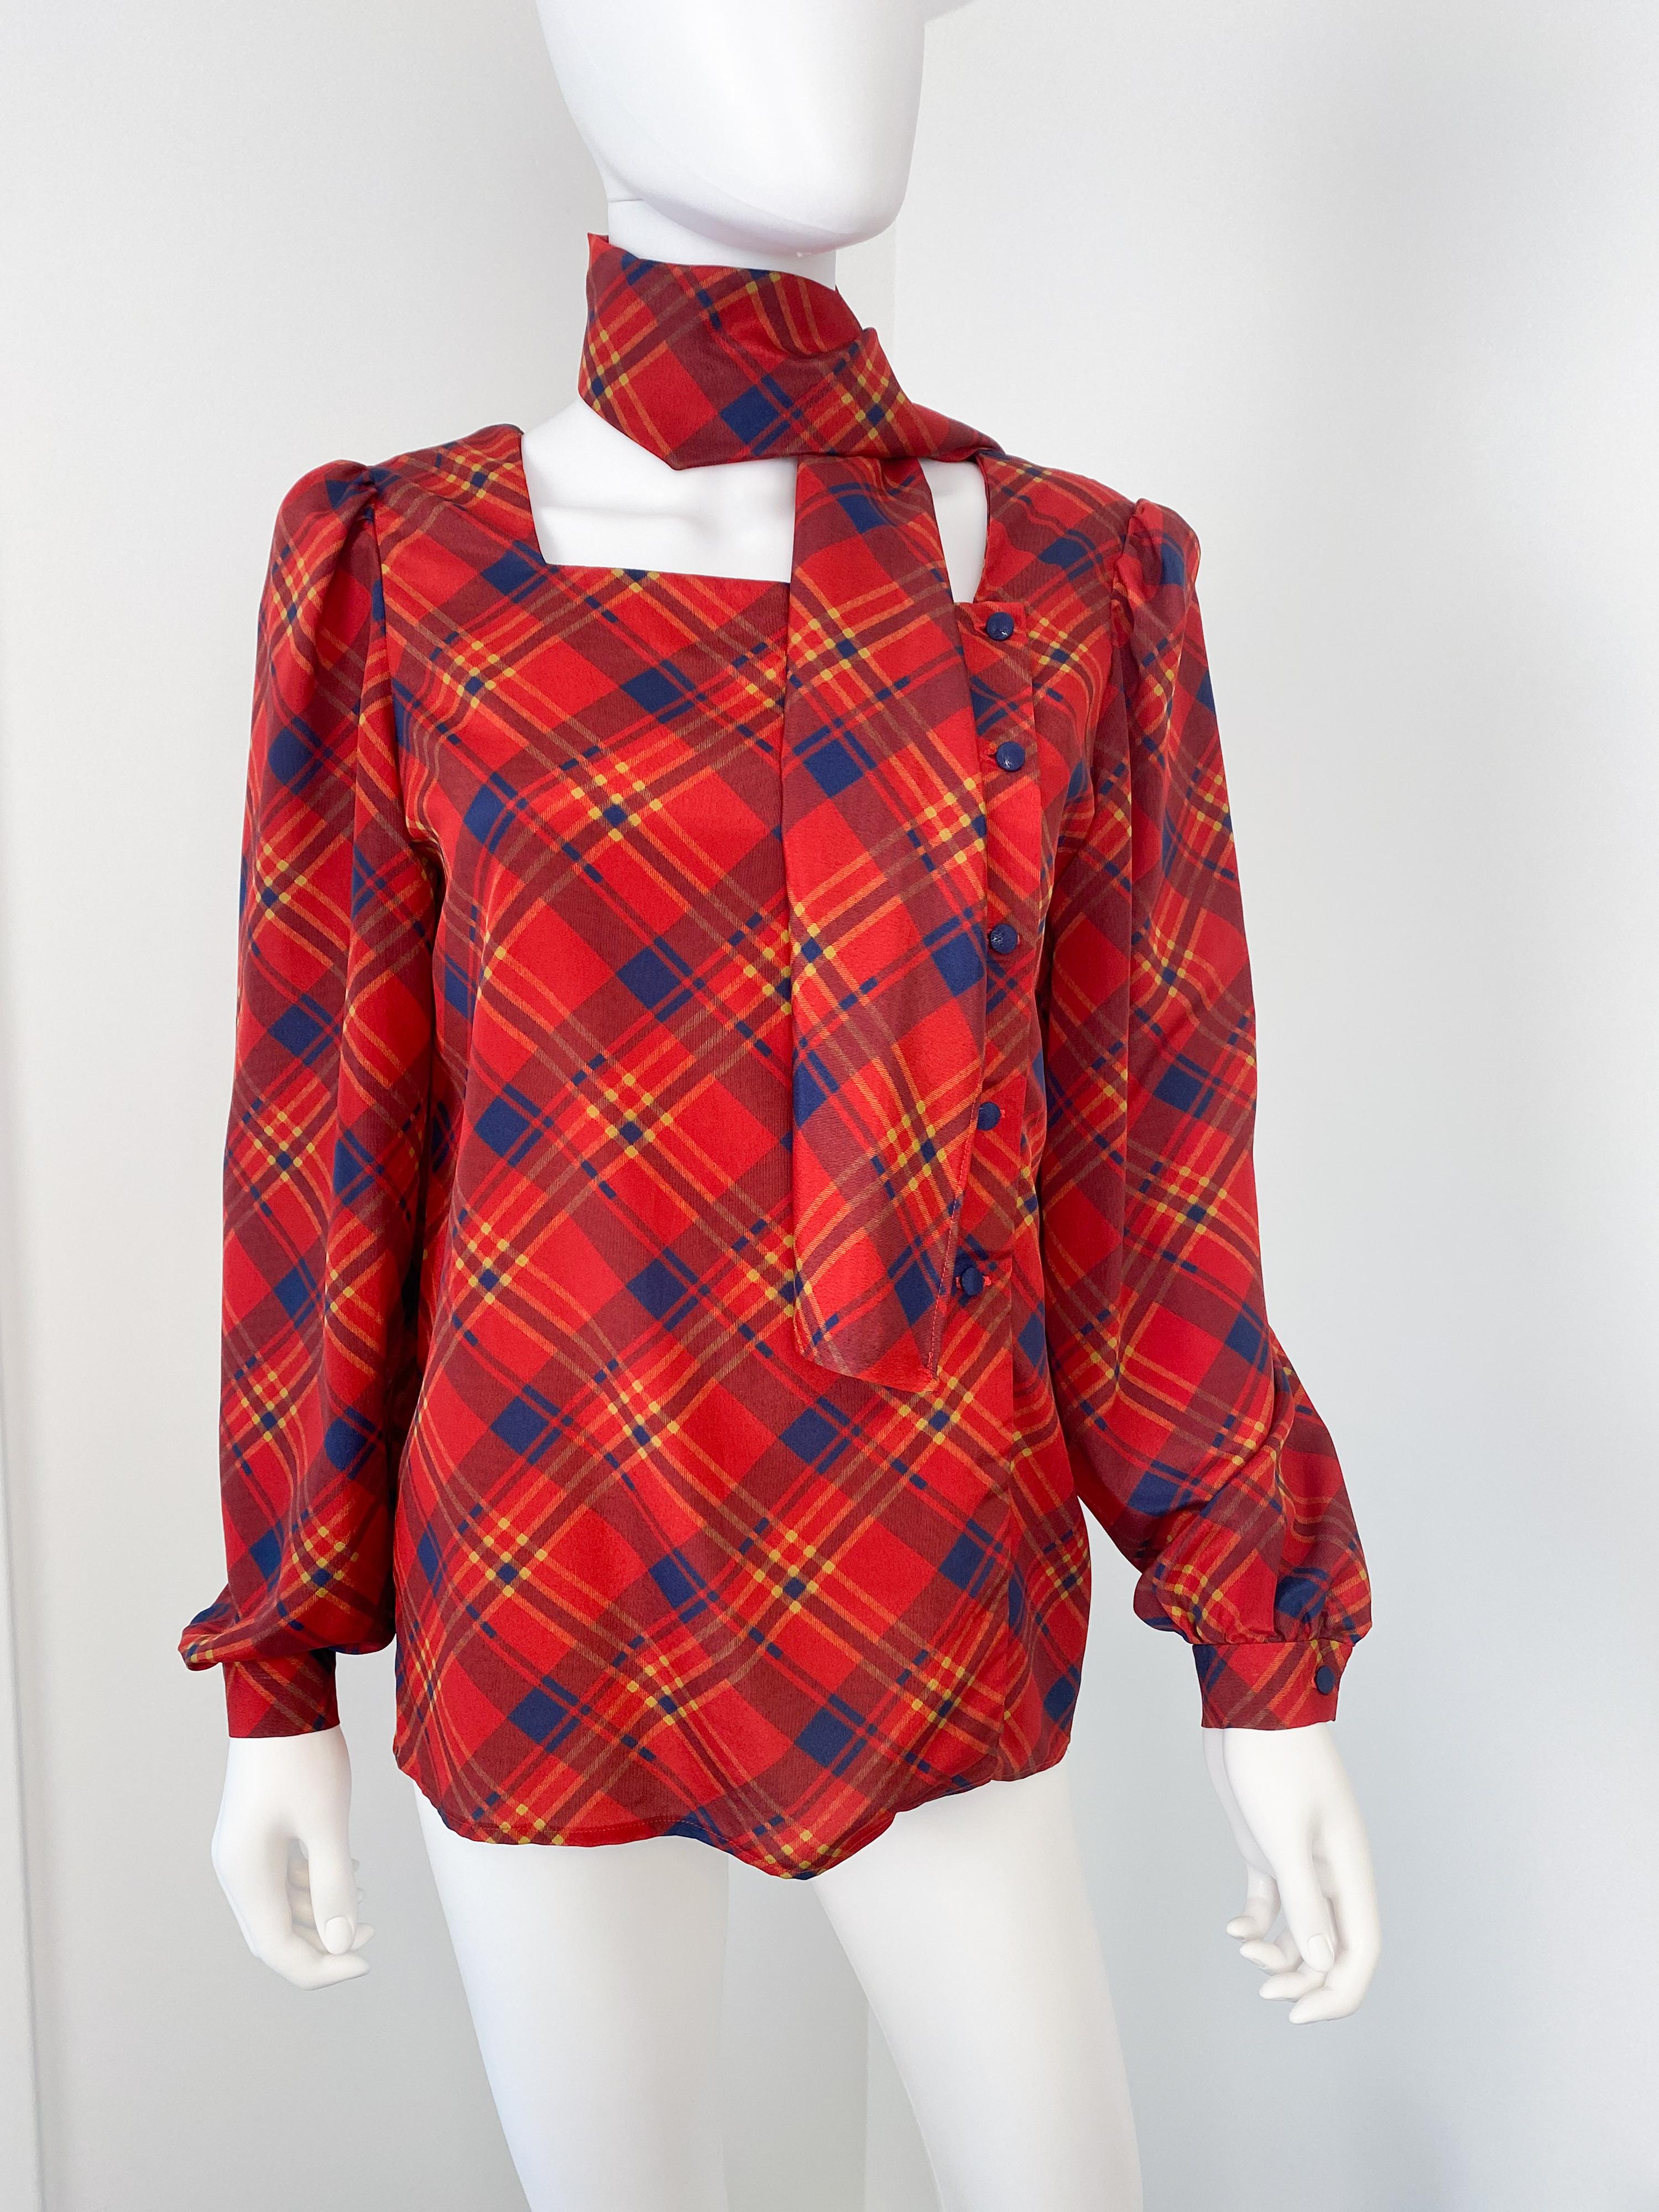 Vintage 1980s Silky Polyester Blouse Top Red and Blue Tartan Size 6/8 In Excellent Condition For Sale In Atlanta, GA